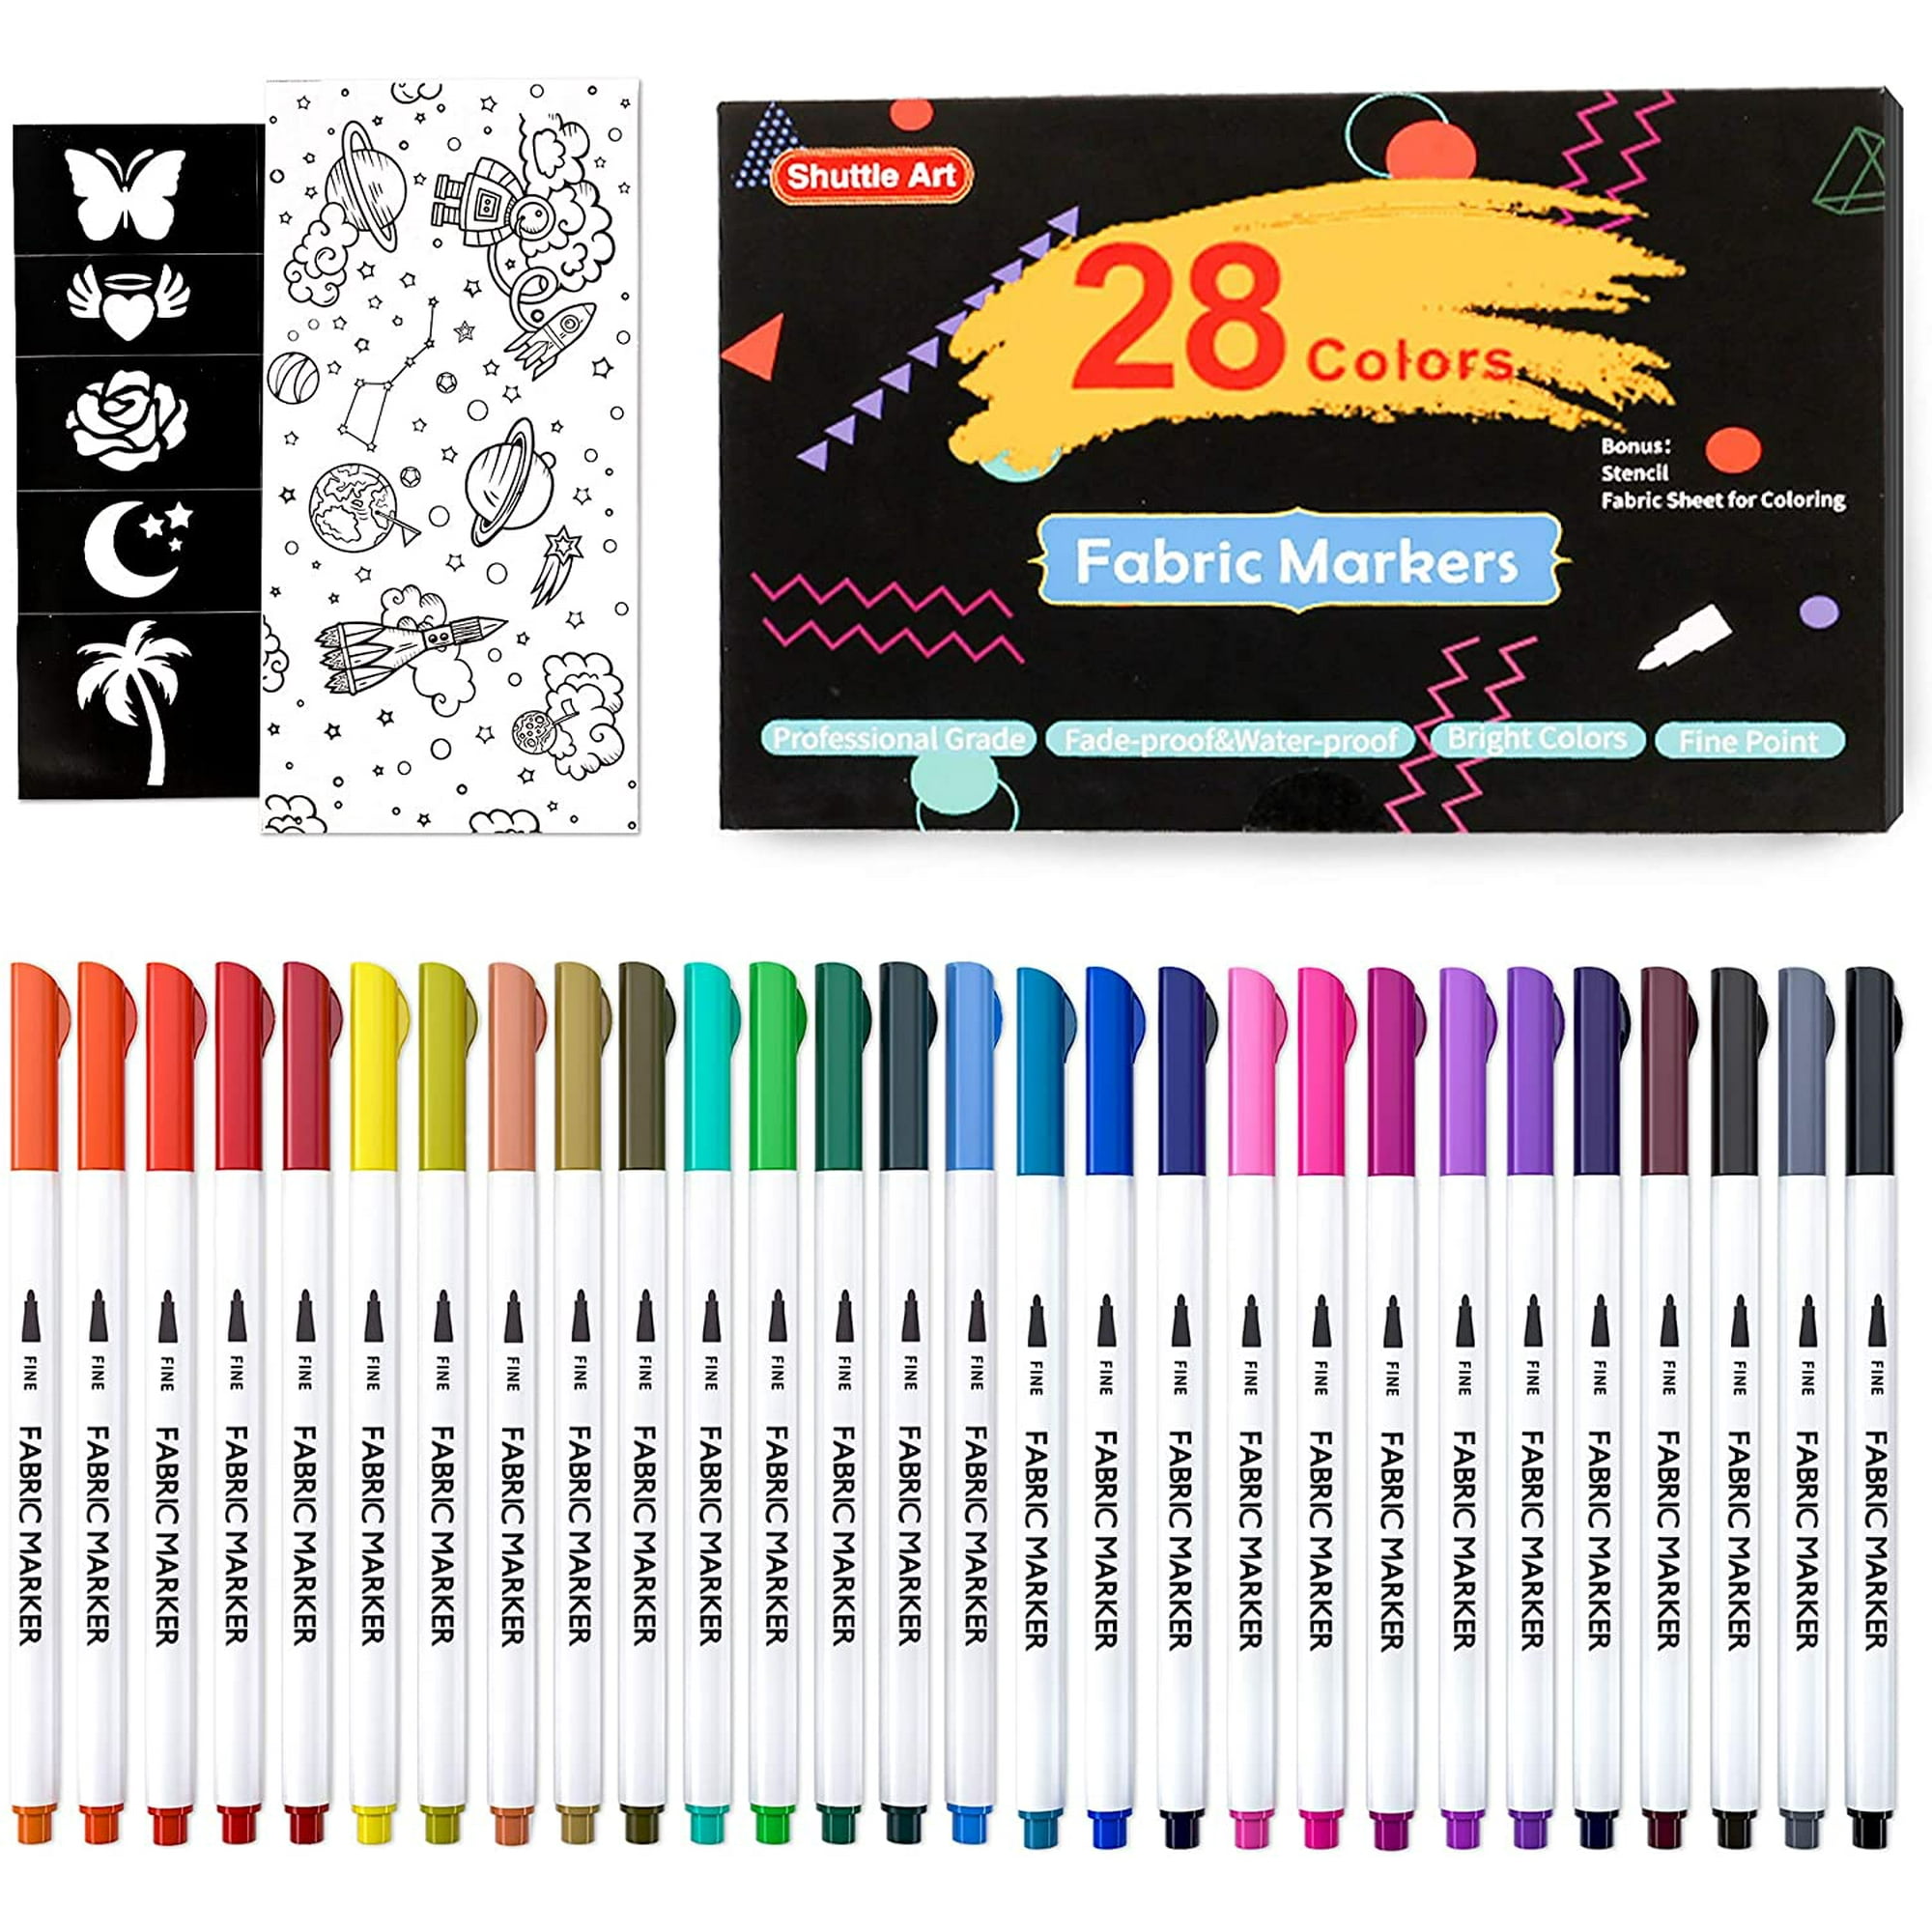 28 Fabric Markers, Art Fabric Markers Permanent Markers for T-Shirts Clothes Sneakers Jeans 11 Stencils 1 Fabric Sheet,Permanent Fabric Pens for Kids Adult Painting Writing | Walmart Canada